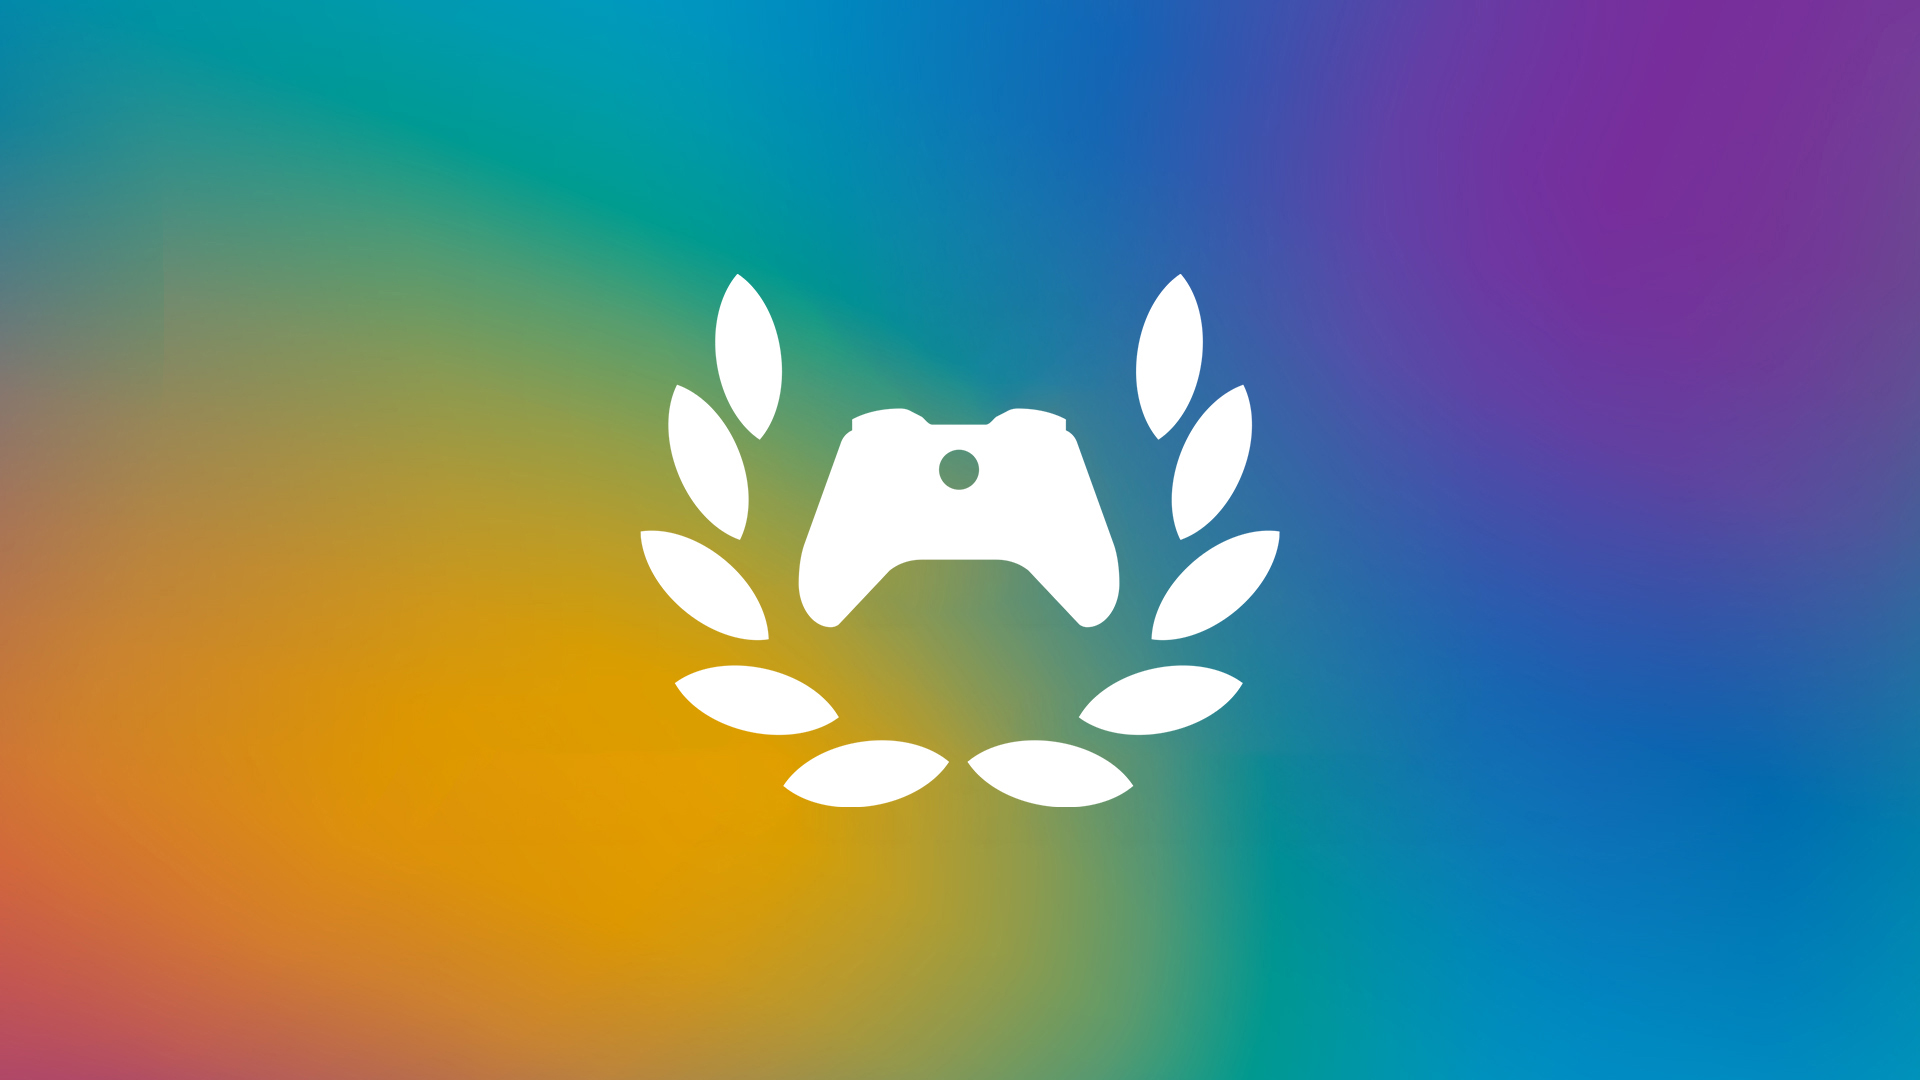 White Xbox controller icon with white laurels surrounding it layers over a blurred rainbow background